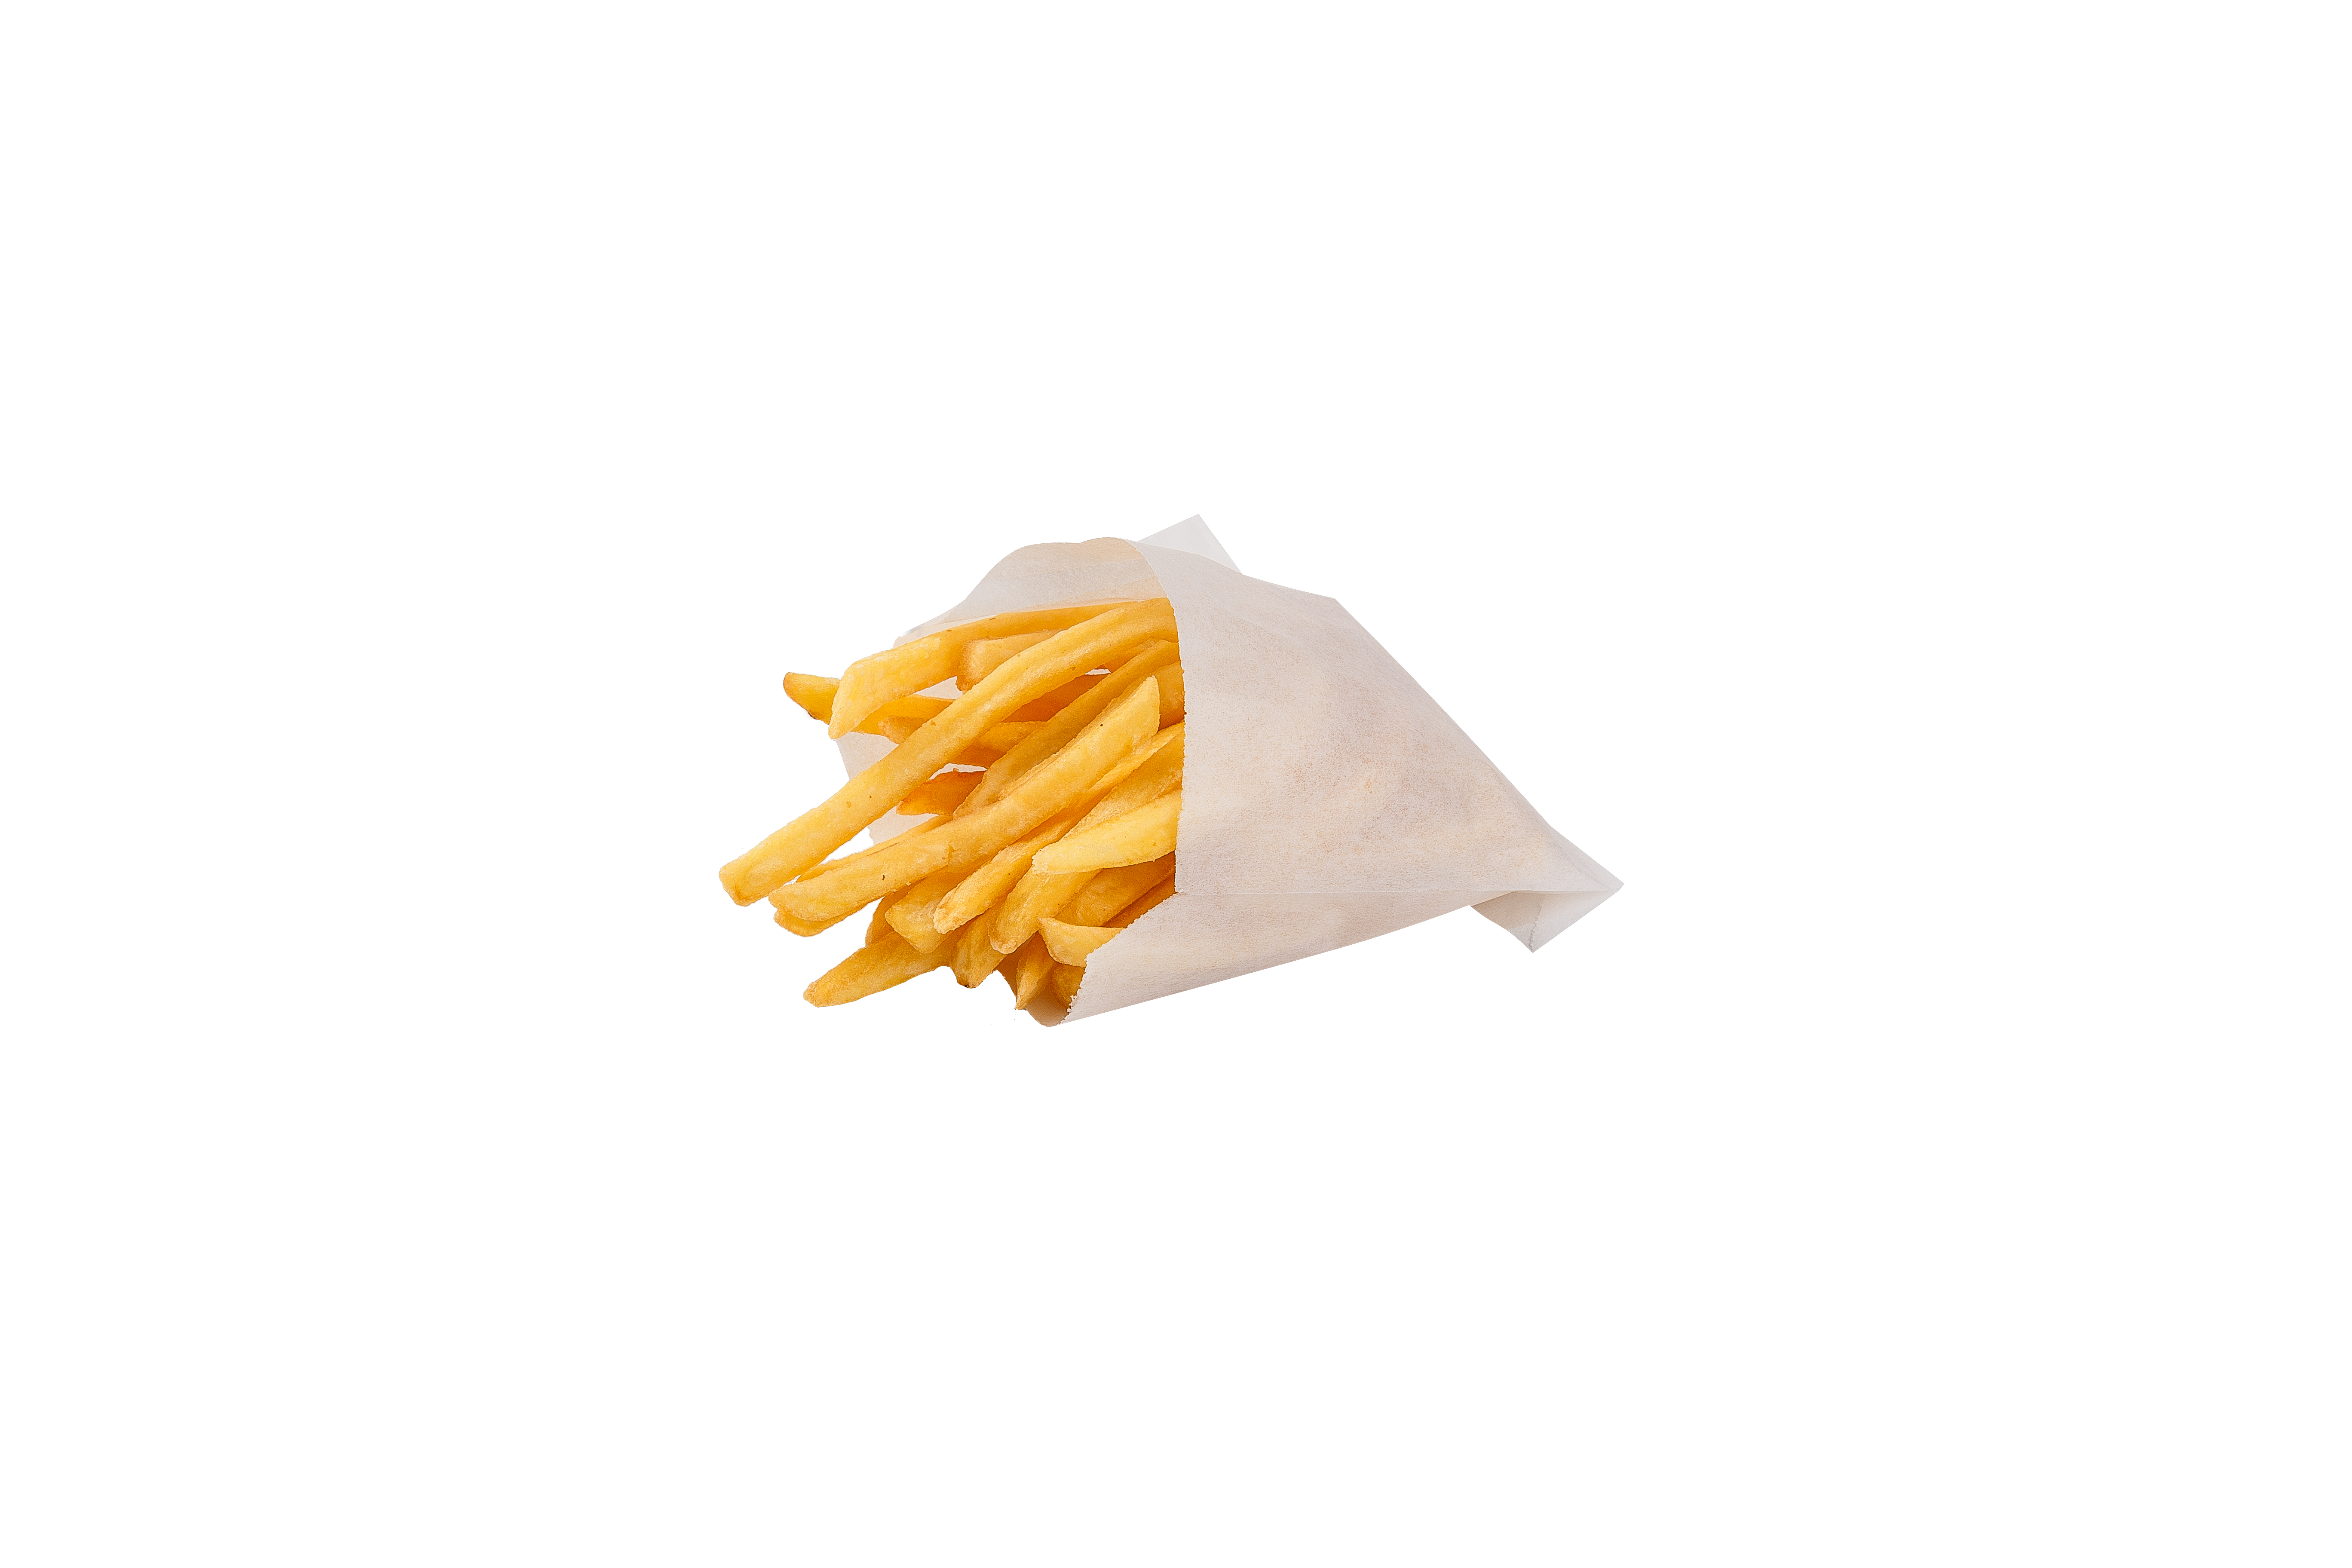 OSQ BAG FRY paper bags for French fries